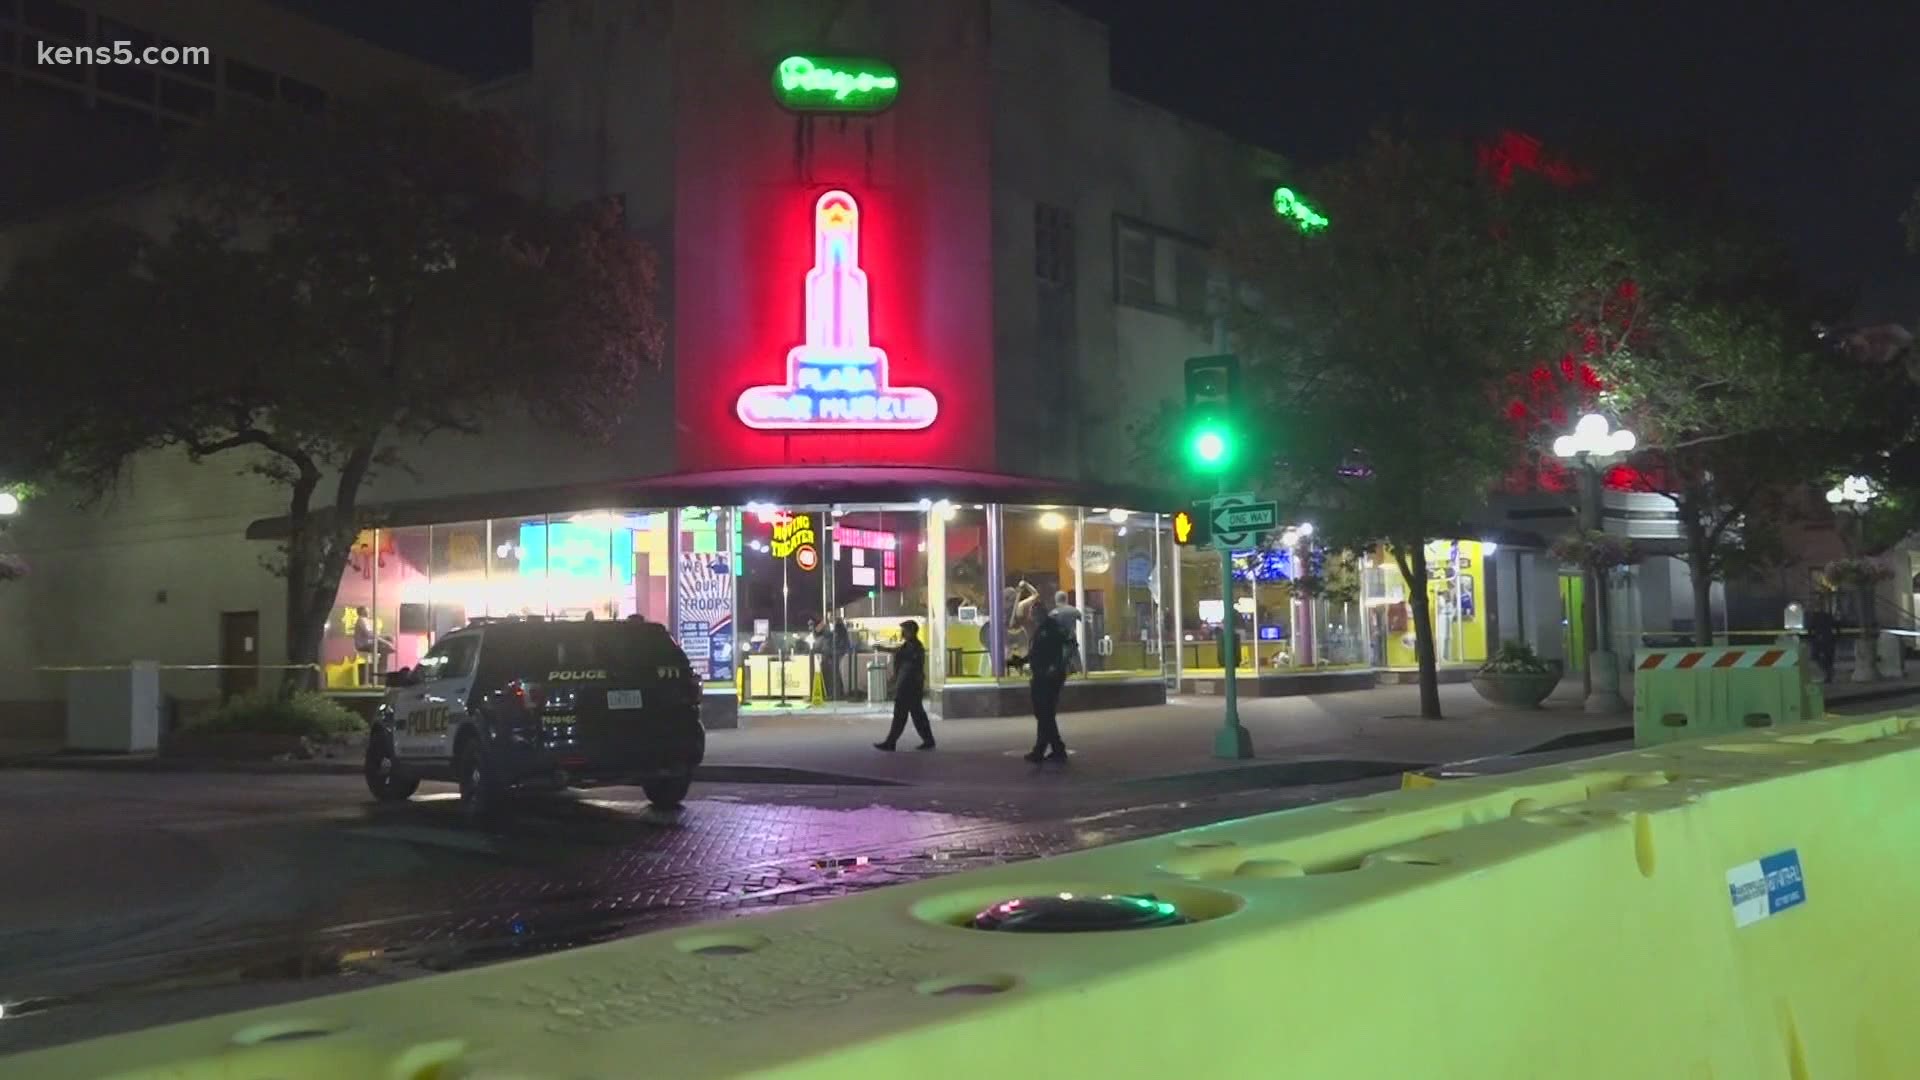 Police were called to Alamo Plaza just before 2 a.m. Saturday after multiple calls for a shooting